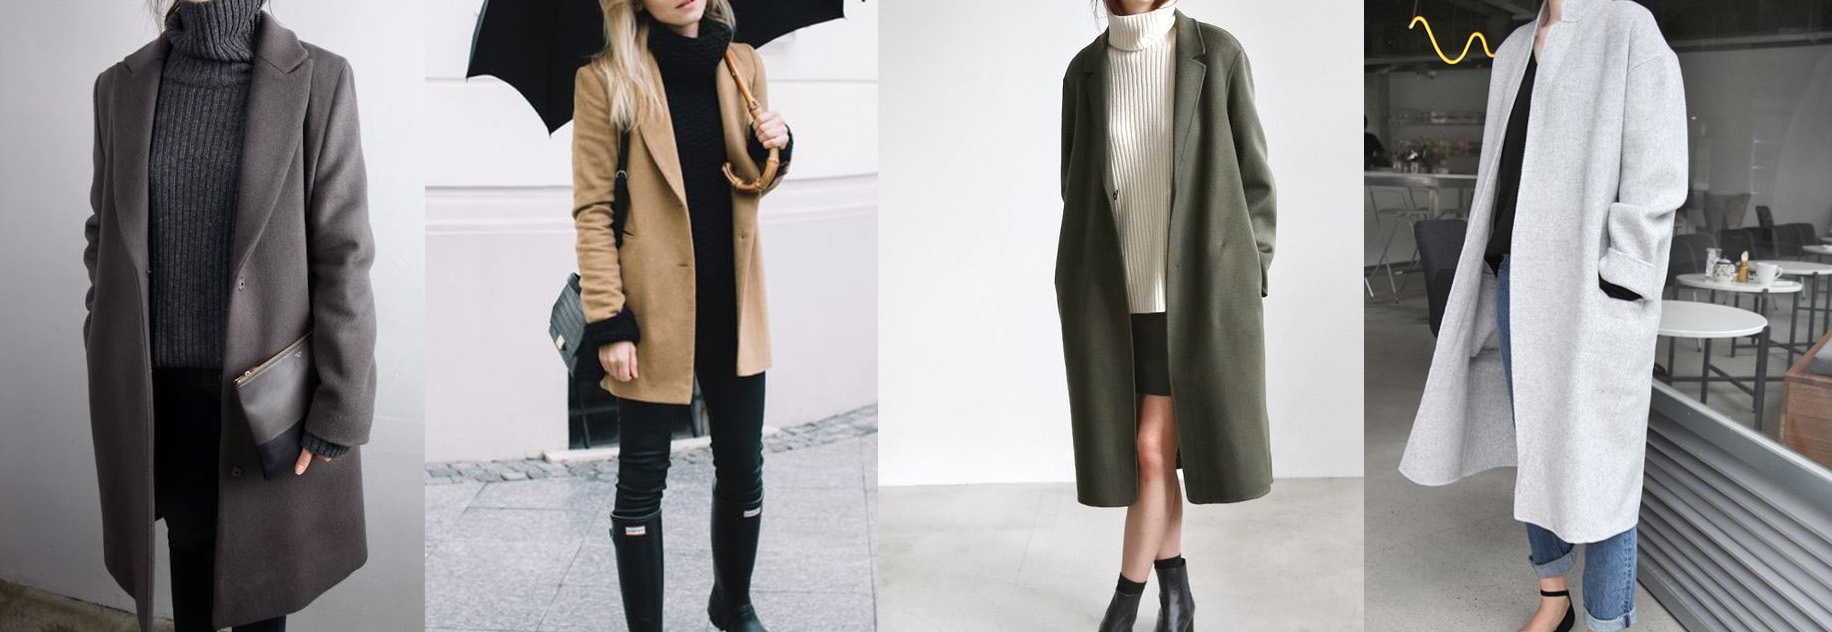 210 MINIMAL Style Inspiration ideas  style, style inspiration, how to wear